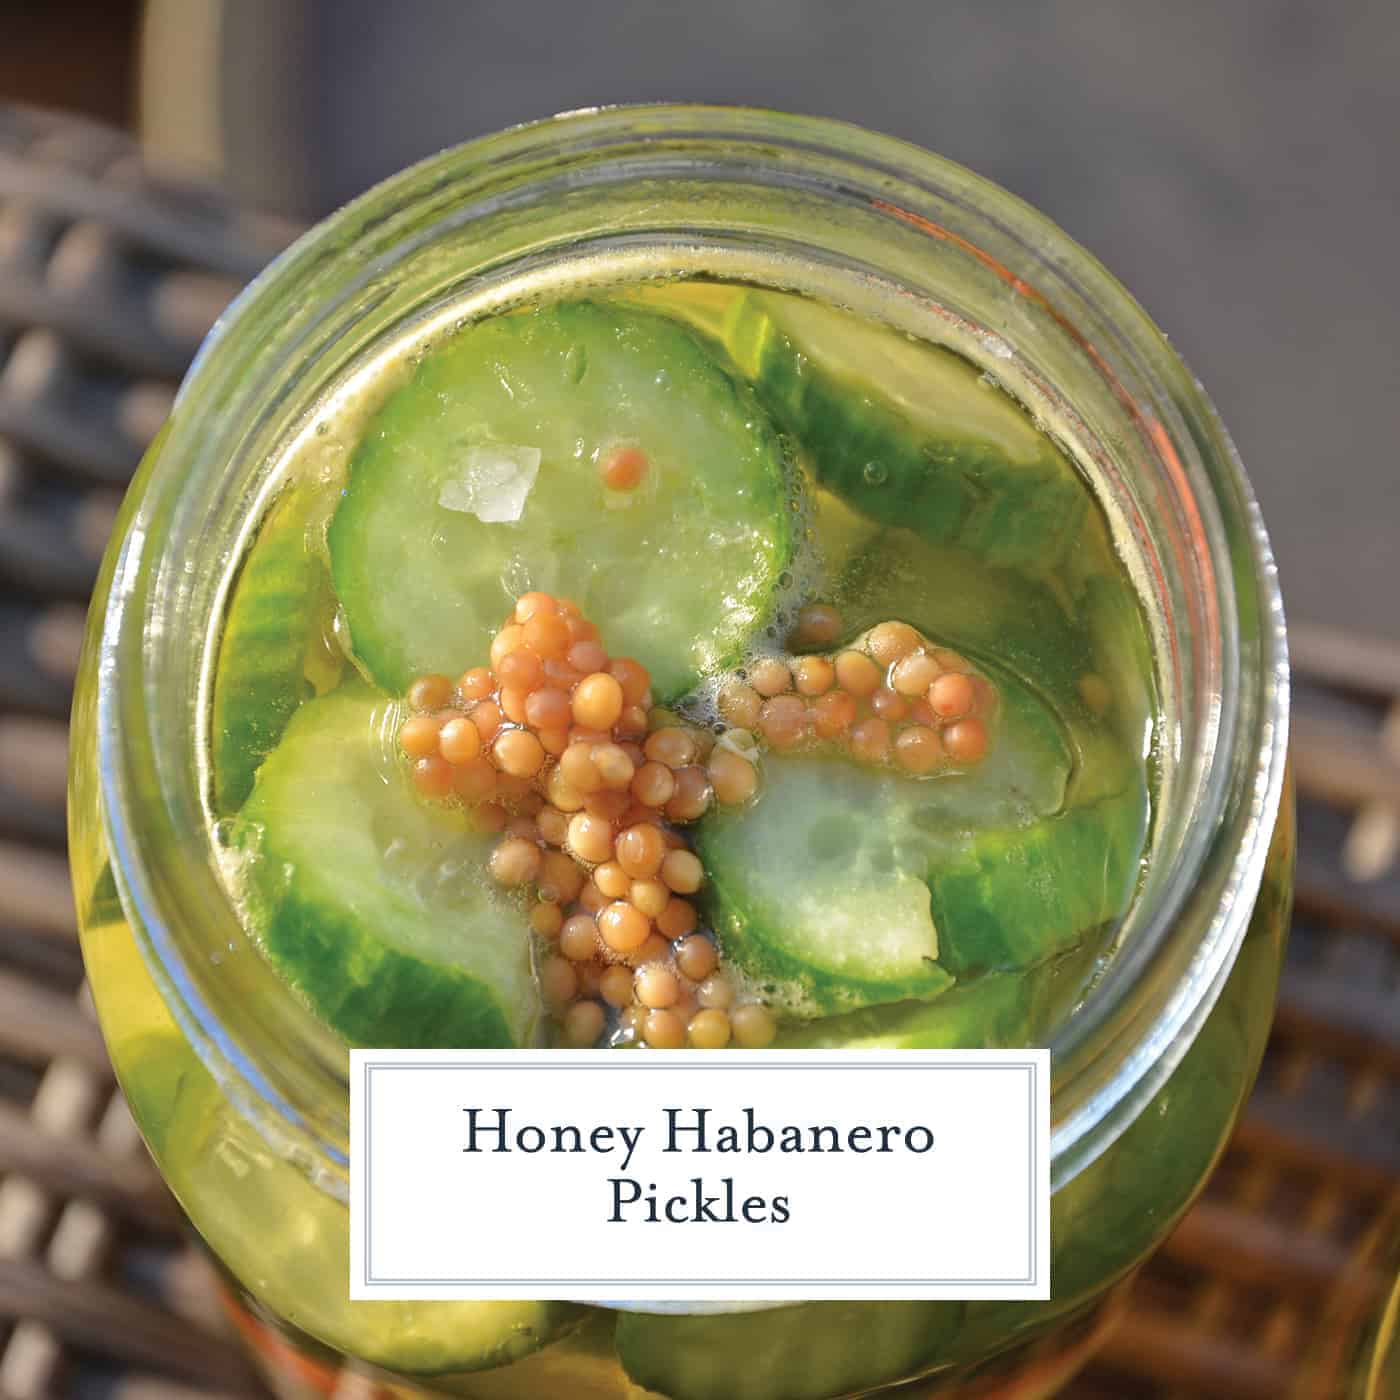 Honey Habanero Pickles are the best of both worlds, spicy and sweet. Eat them as a snack or pair them your favorite burger or hot dog. #homemadepickles #sweetandspicypickles #picklerecipe www.savoryexperiments.com